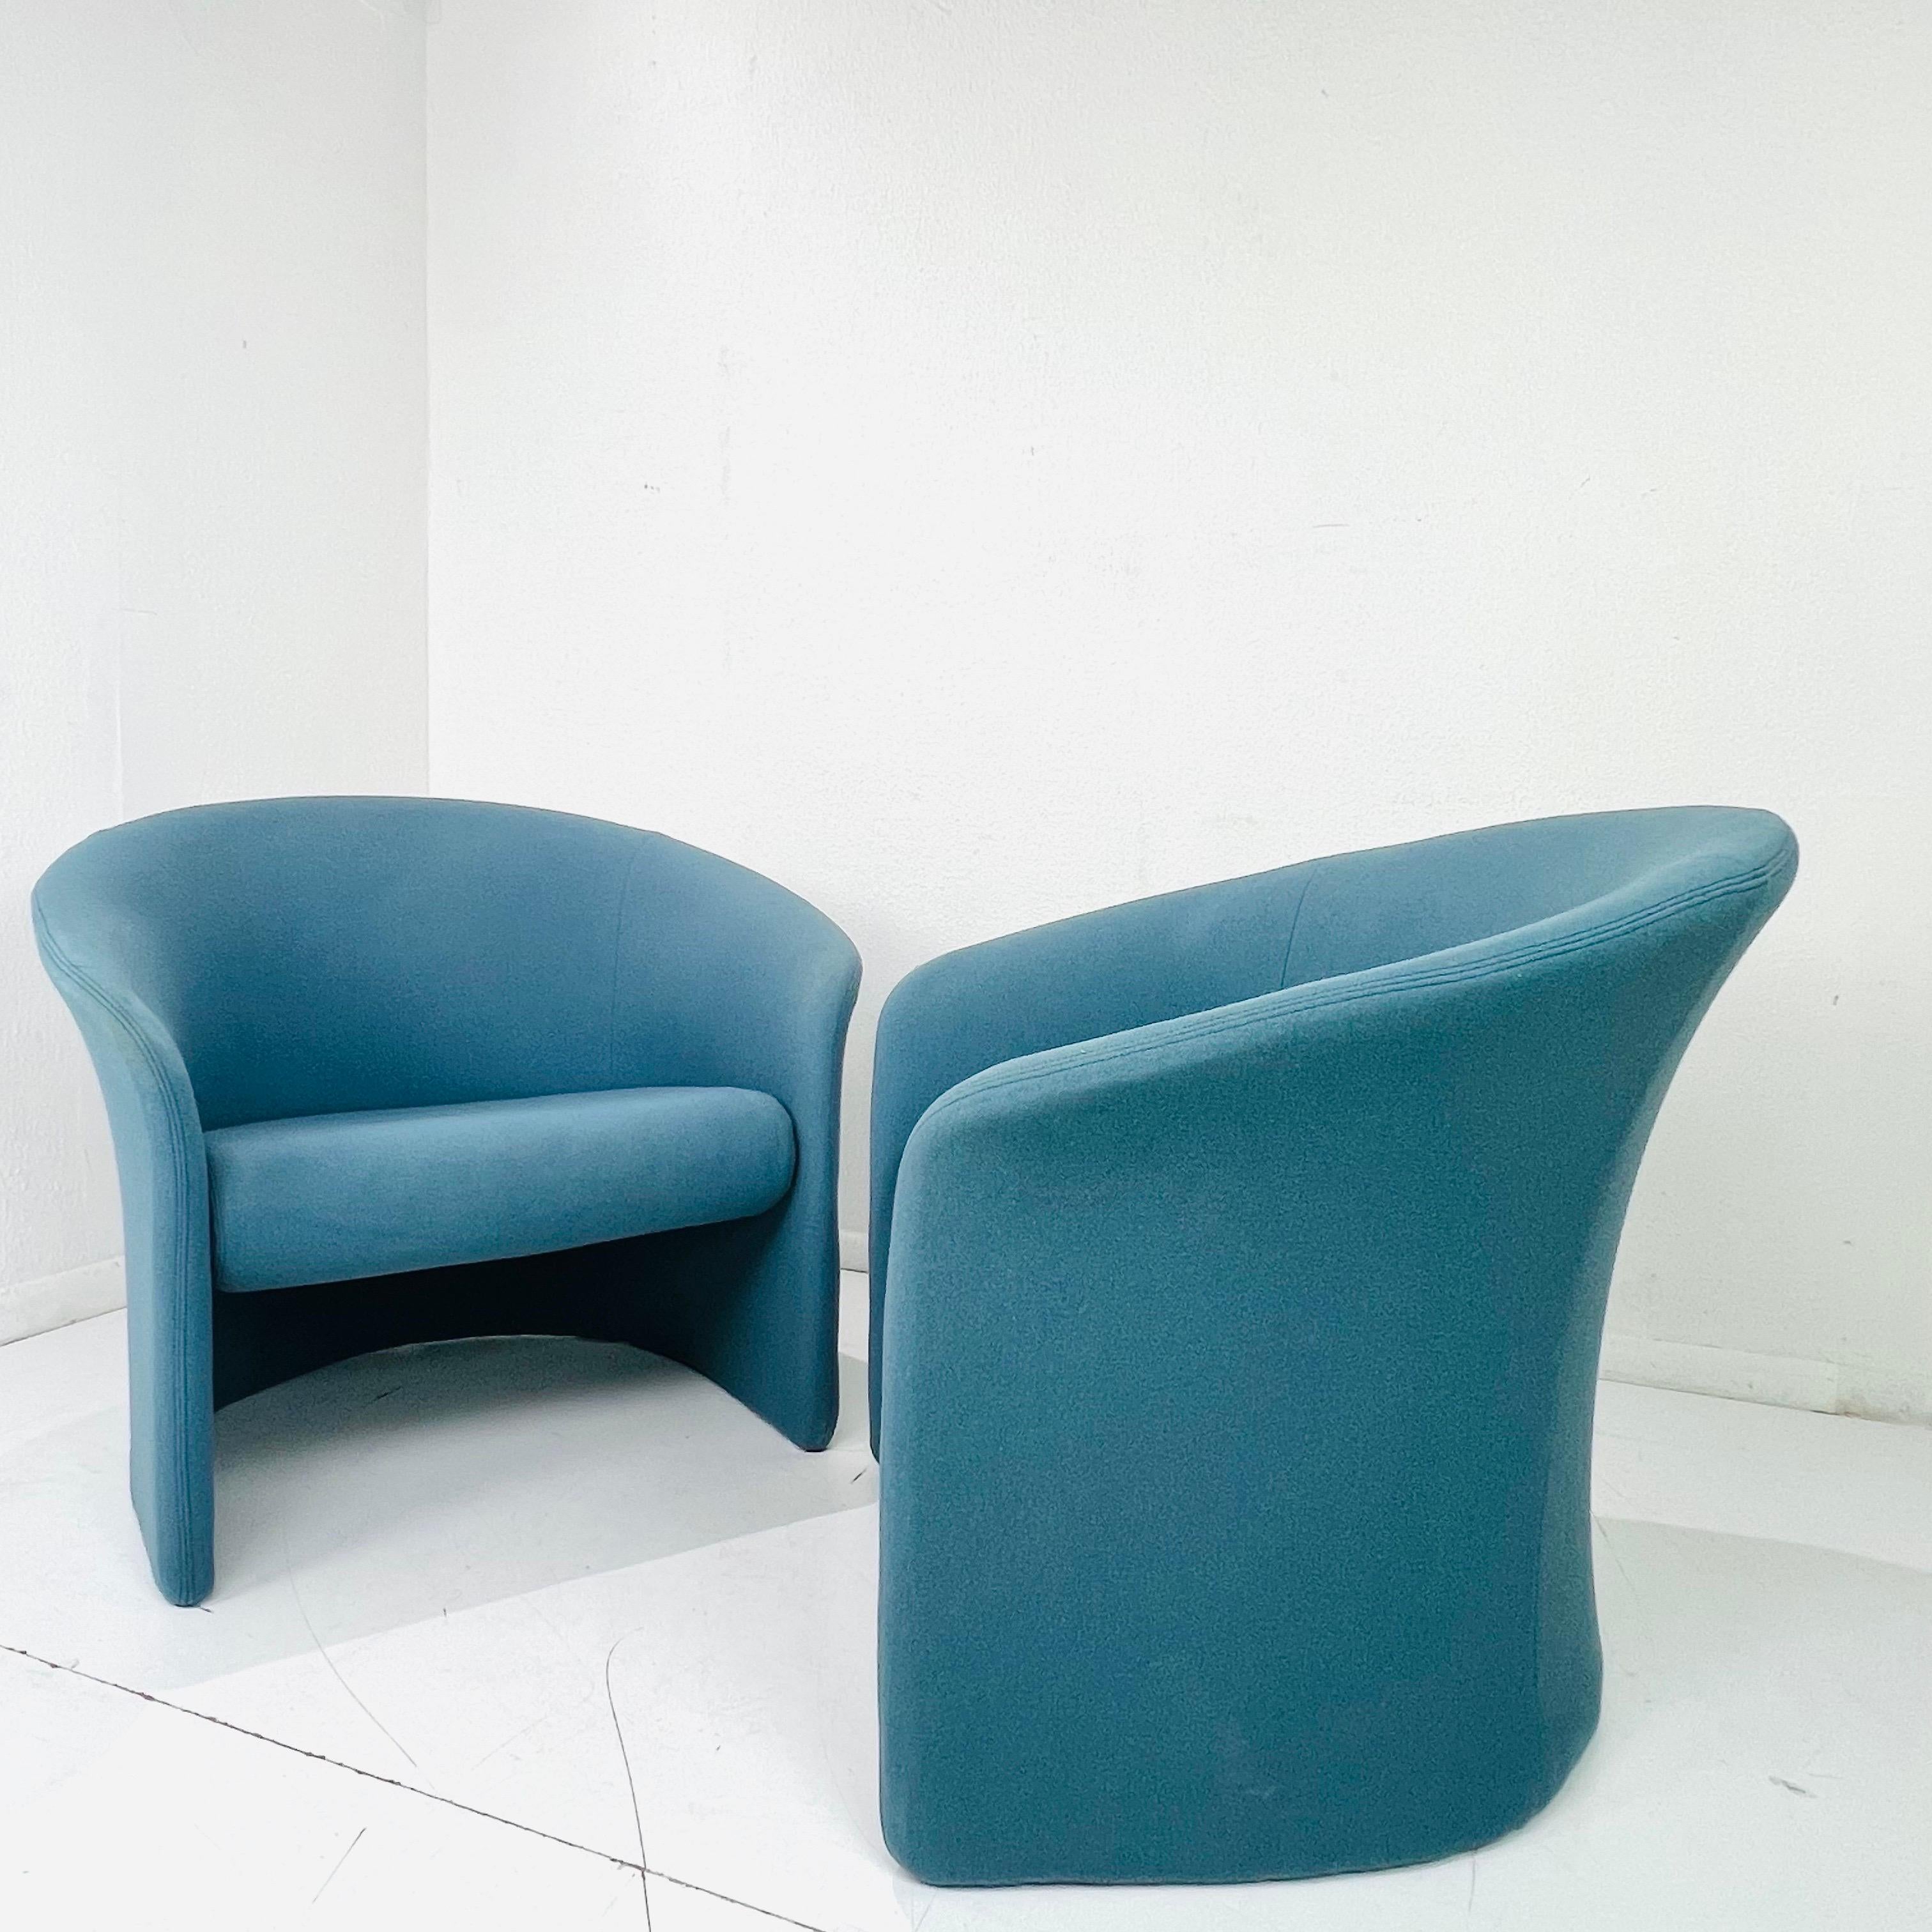 Pair of Postmodern Tub Chairs by Massimo Vignelli For Sale 4